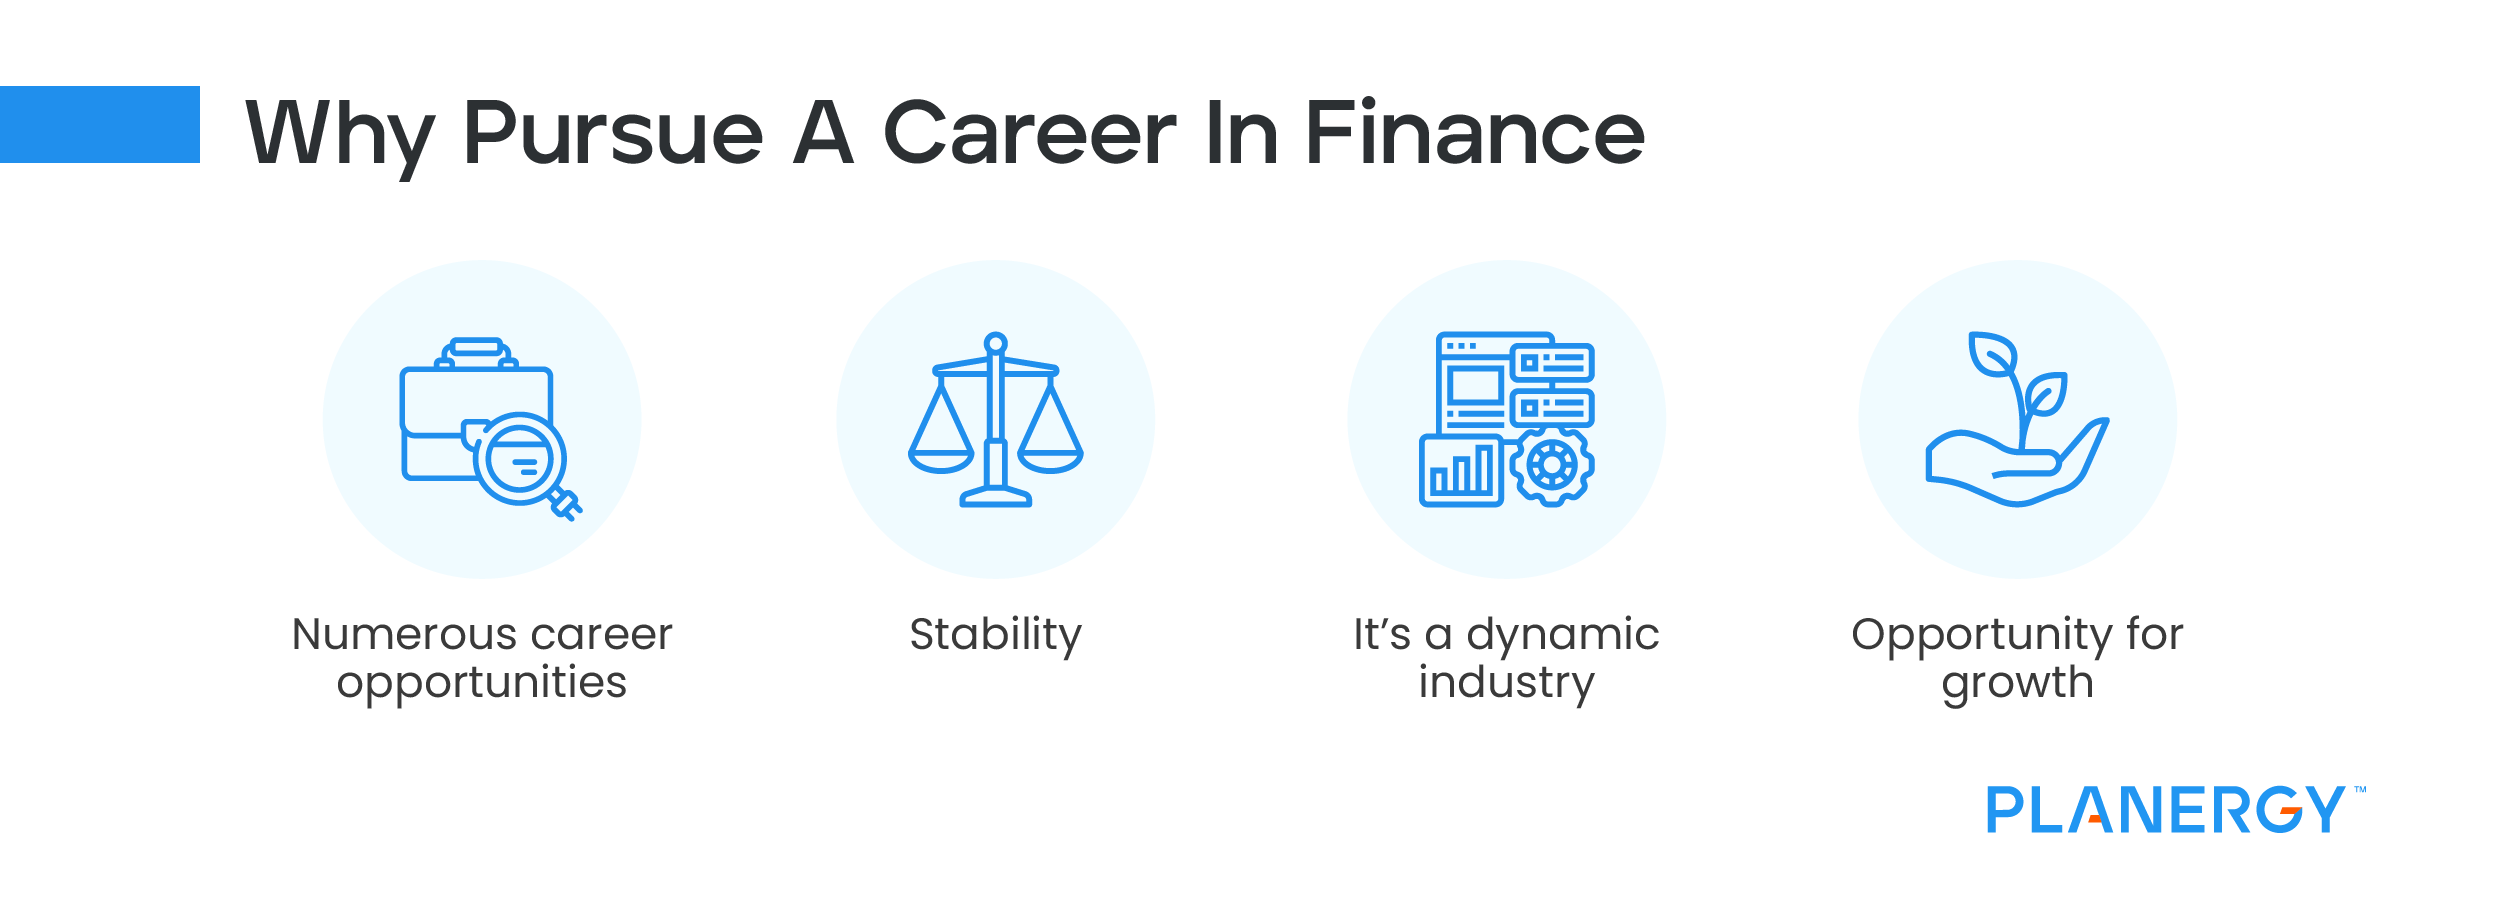 Why Pursue a Career in Finance